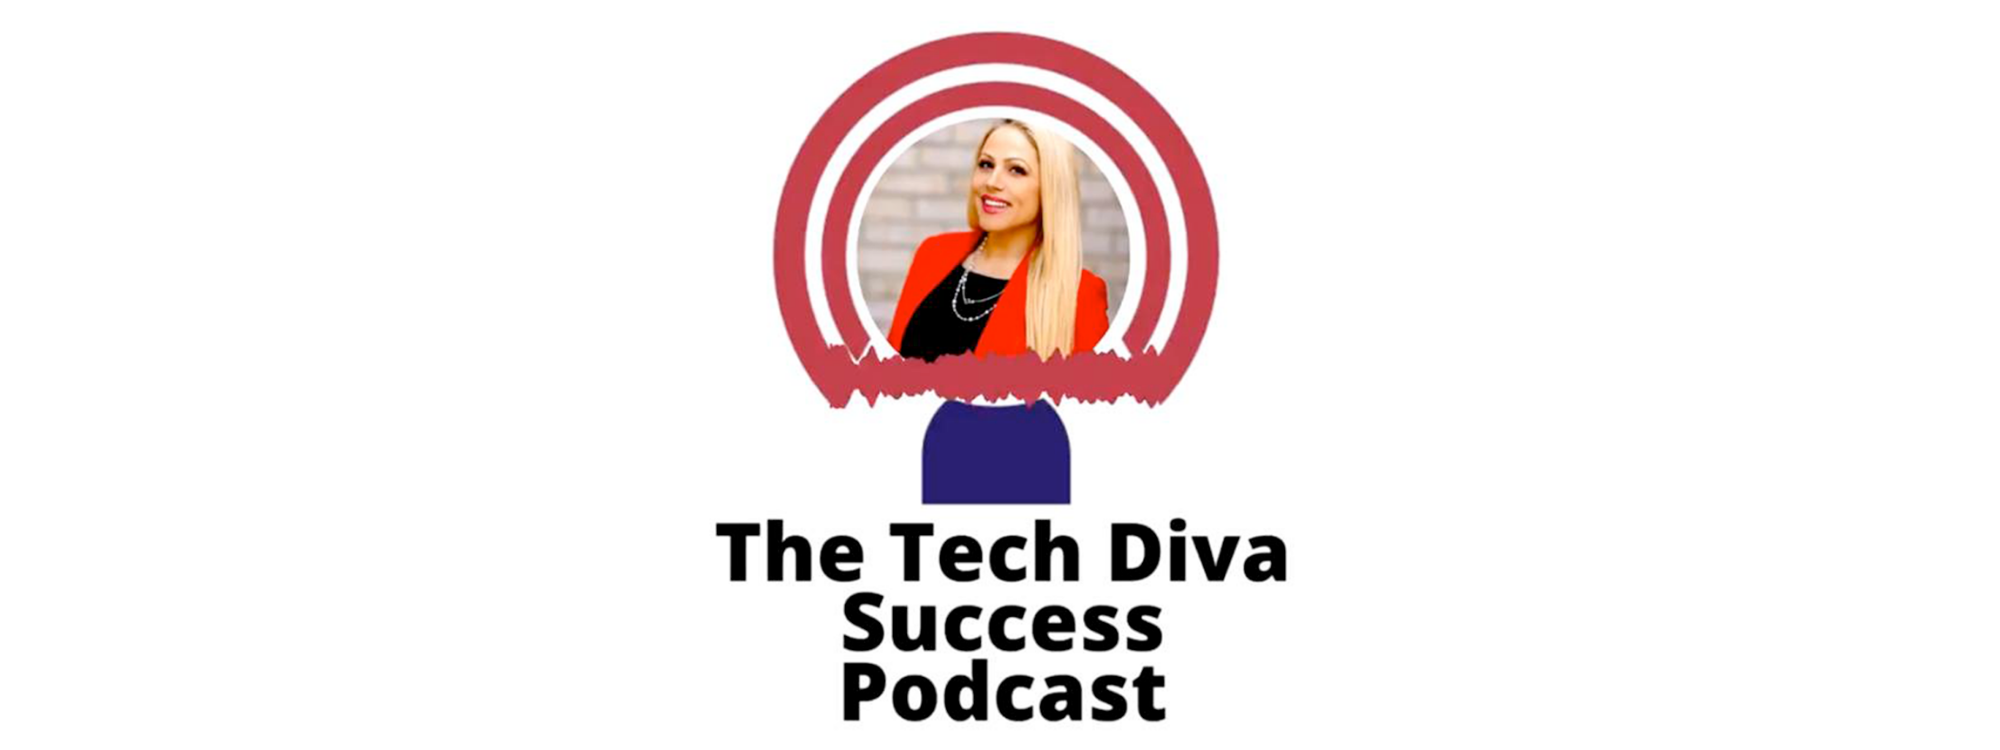 Women in IT: Podcast with CEO Sabrina Shafer